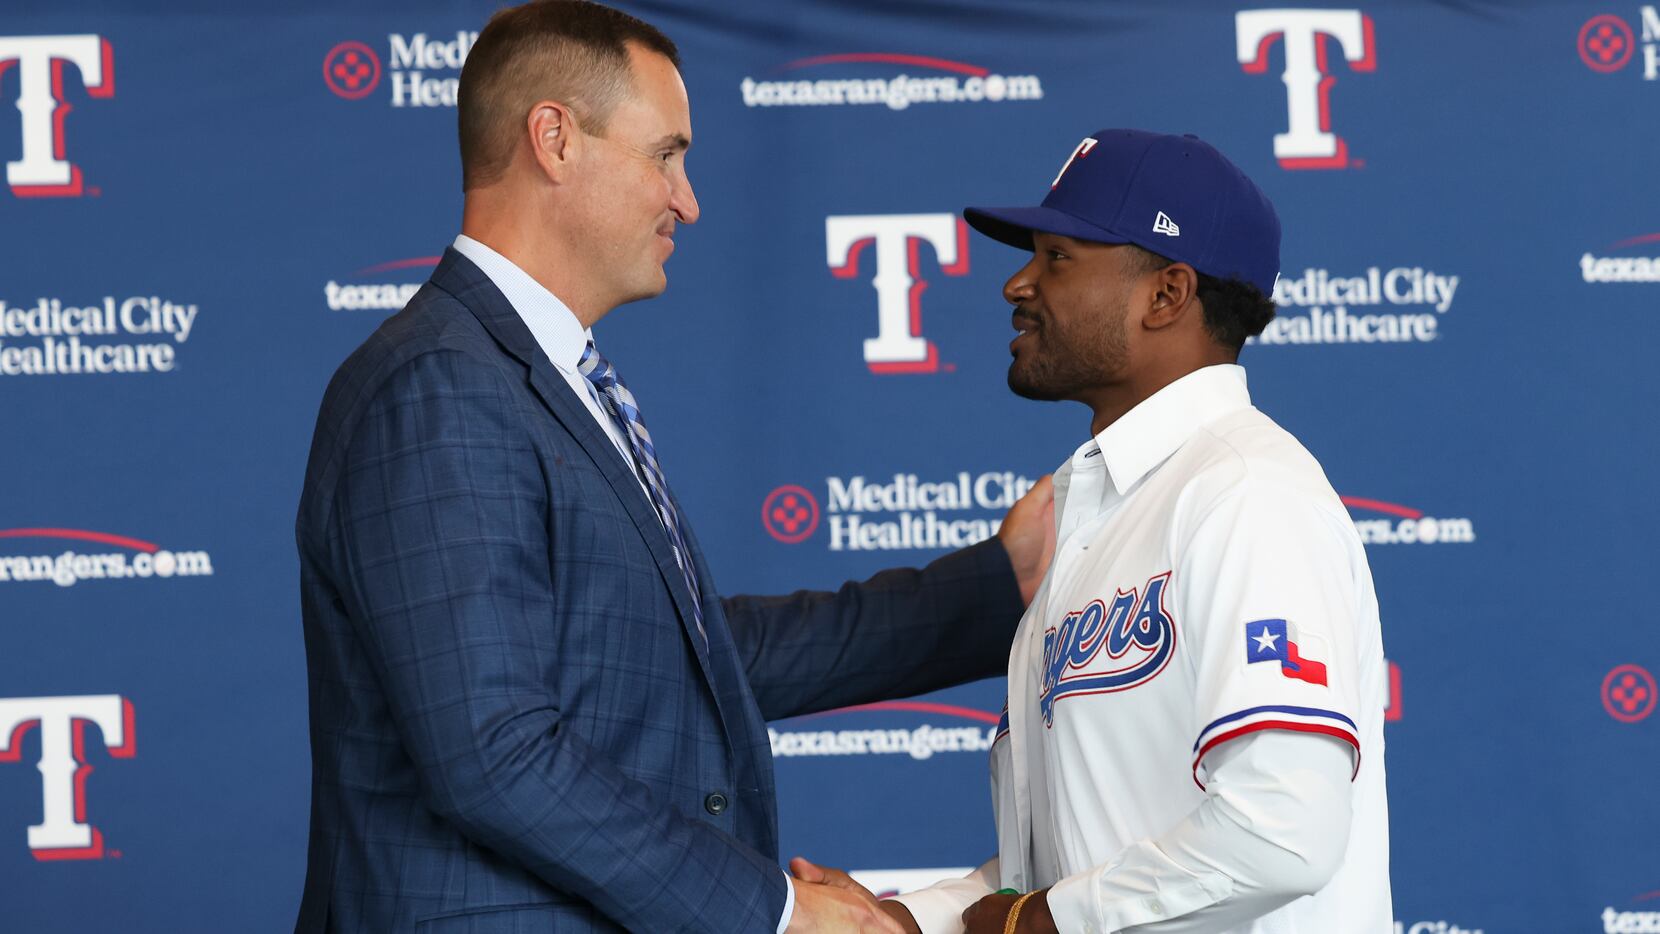 Rangers Draft RHP Kumar Rocker From Tri-City With 3rd Pick of 2022